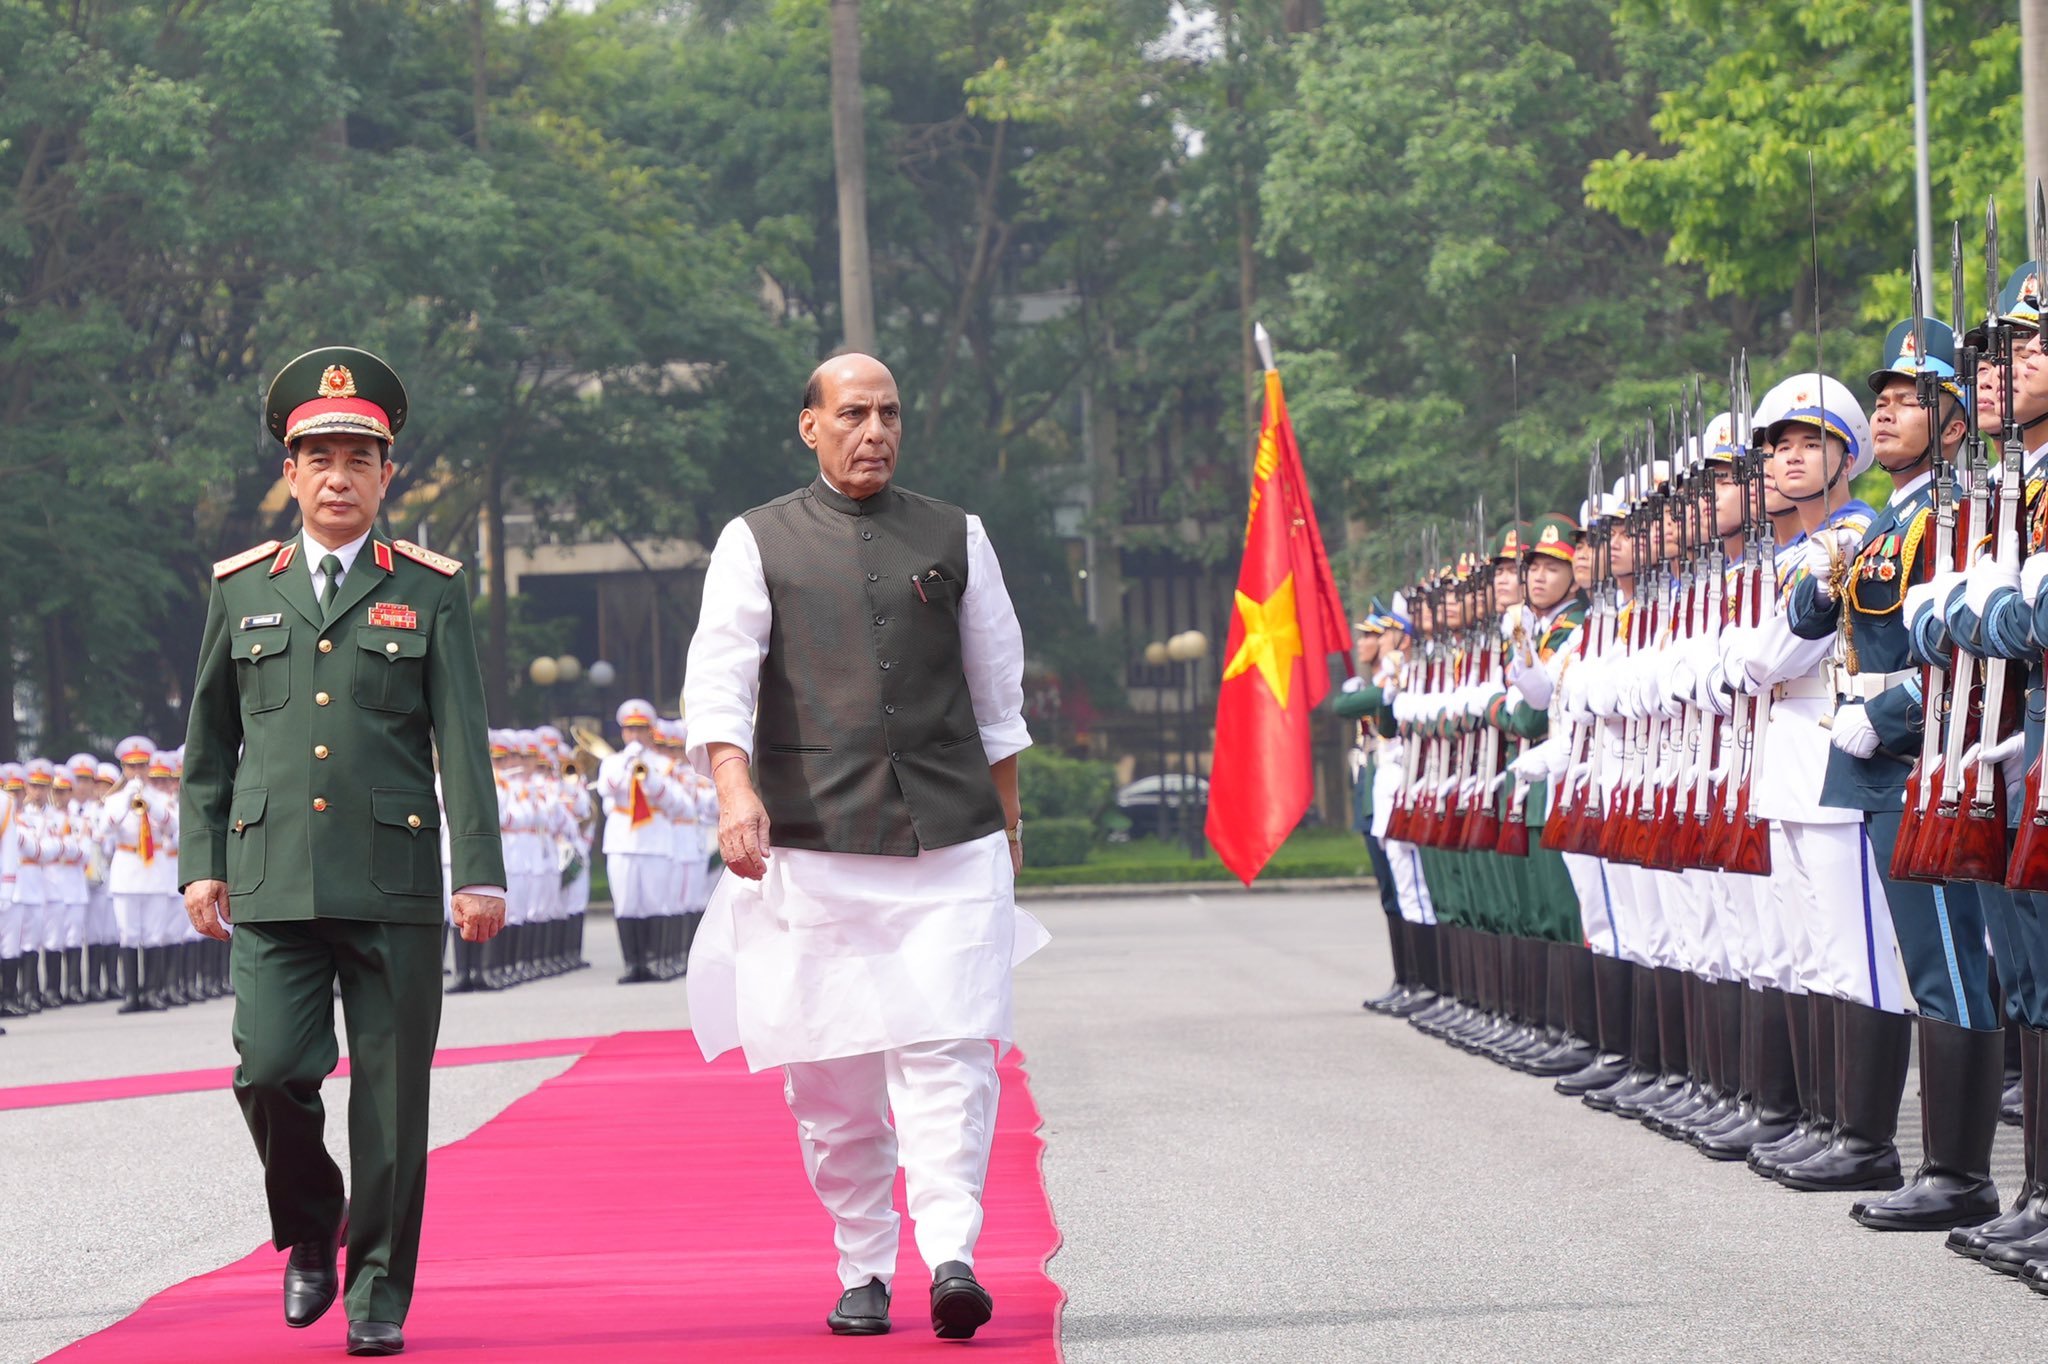 India, Vietnam sign MoU on mutual logistics support as Rajnath Singh holds defence talks with Vietnamese counterpart